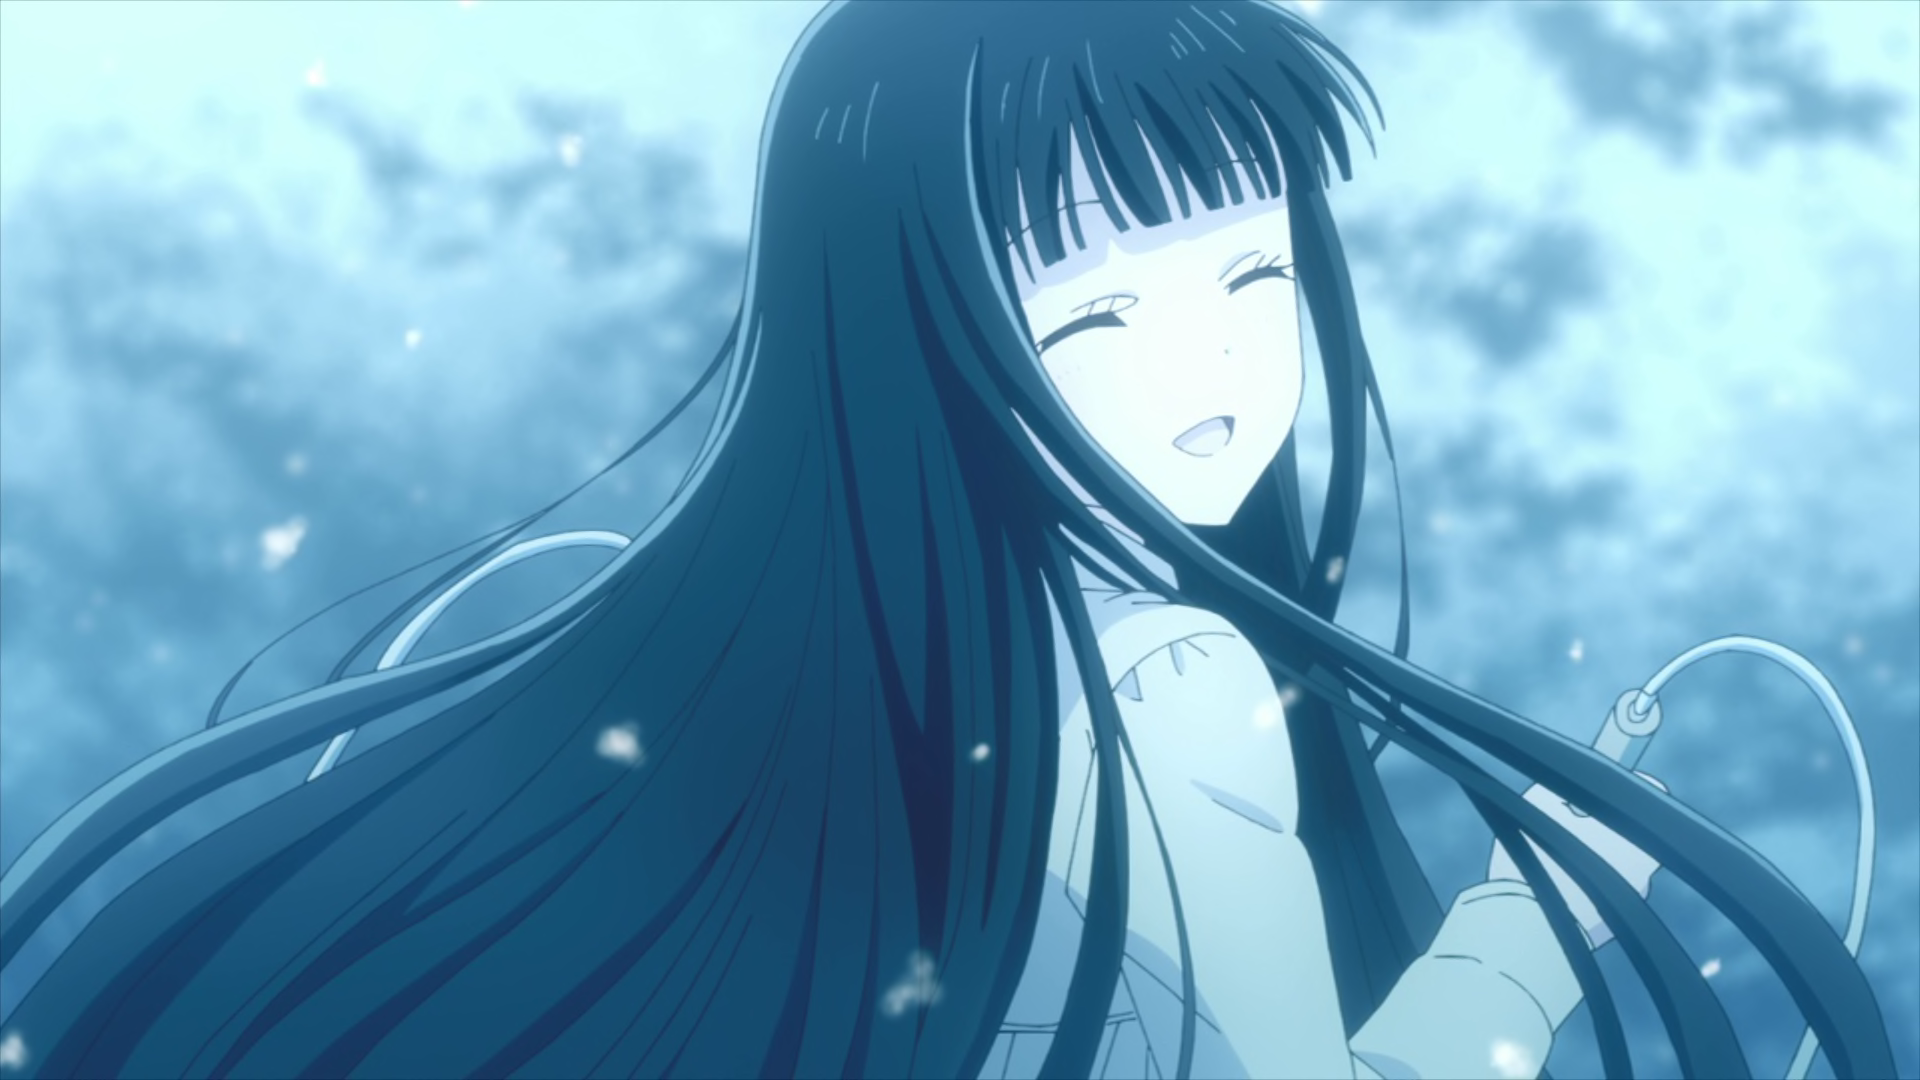 Fruits Basket Season 2 - Cour 2 (sub) Episode 18 Eng Sub - Watch legally on  